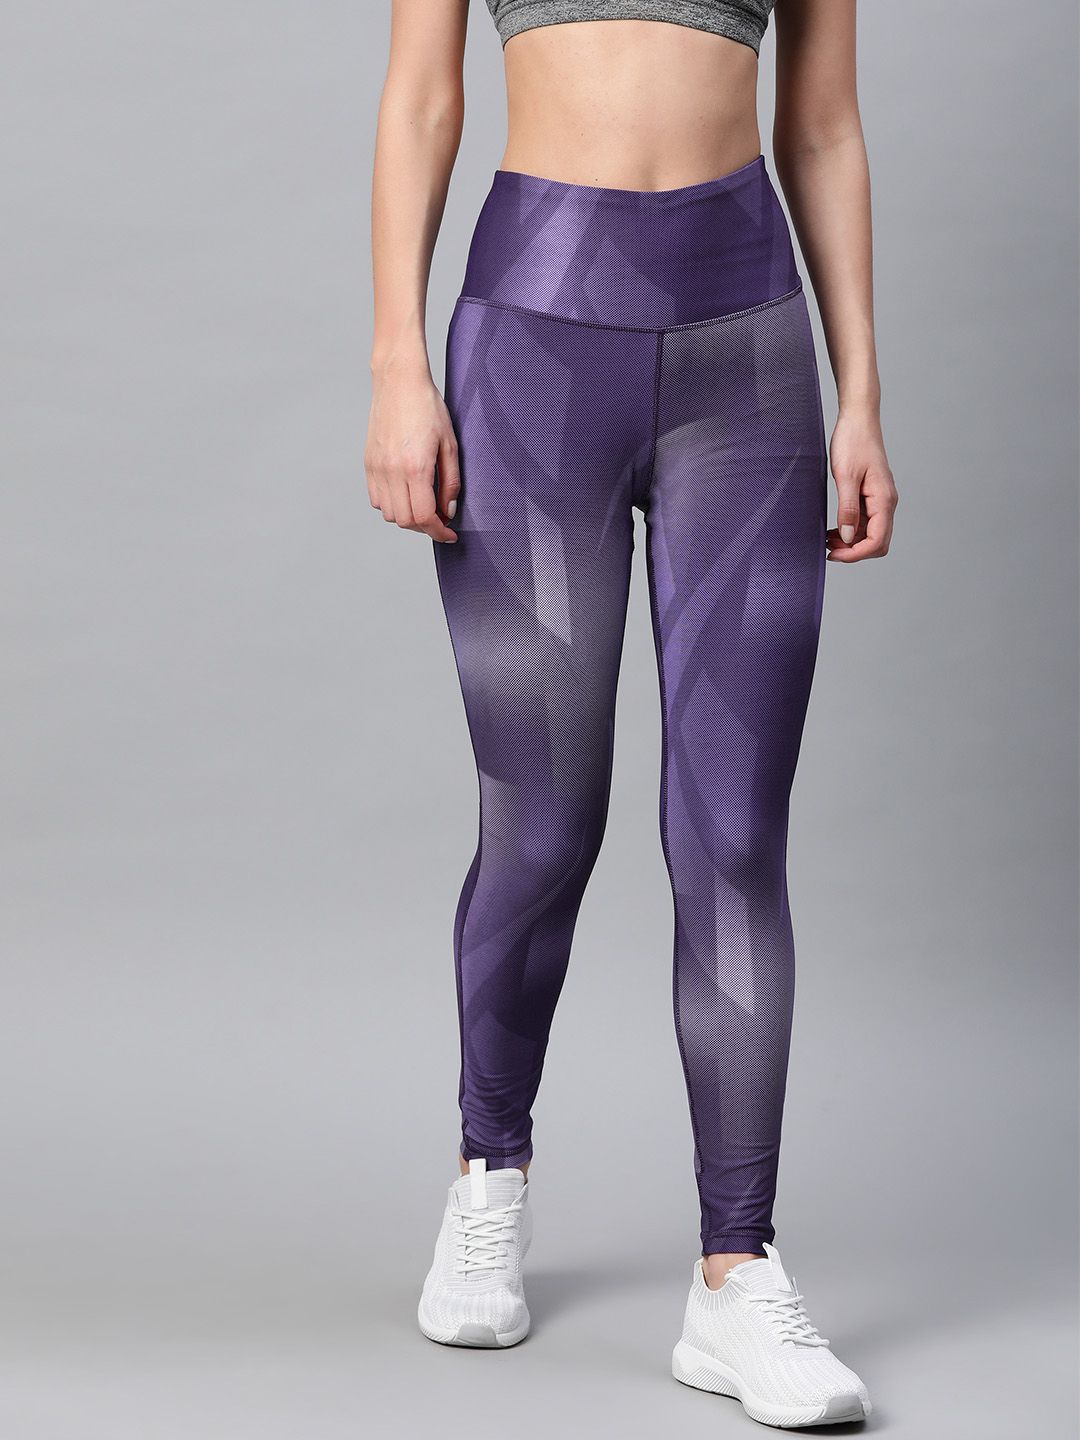 Reebok Women Sustainable Purple Printed SR Lux 2.0 High-Rise AOP Tights Price in India